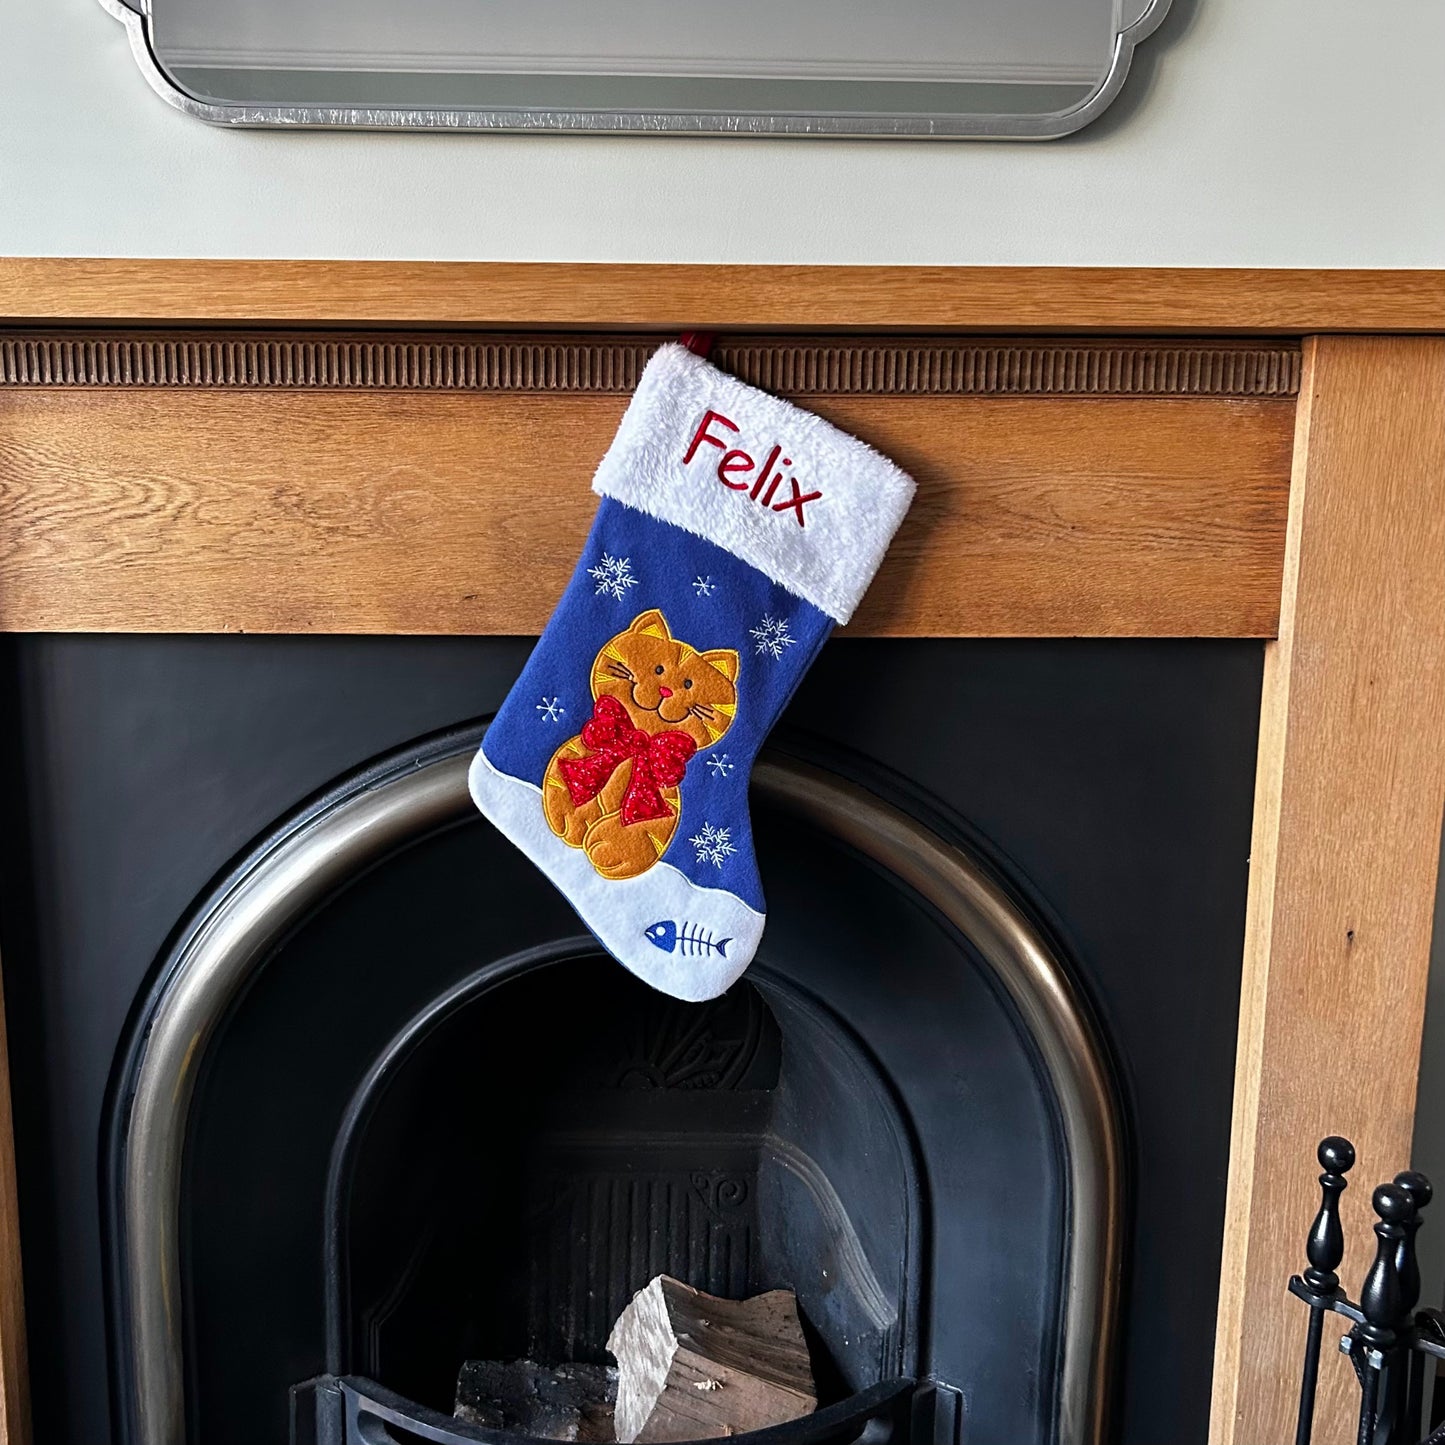 Personalised Embroidered Cat Christmas Stocking